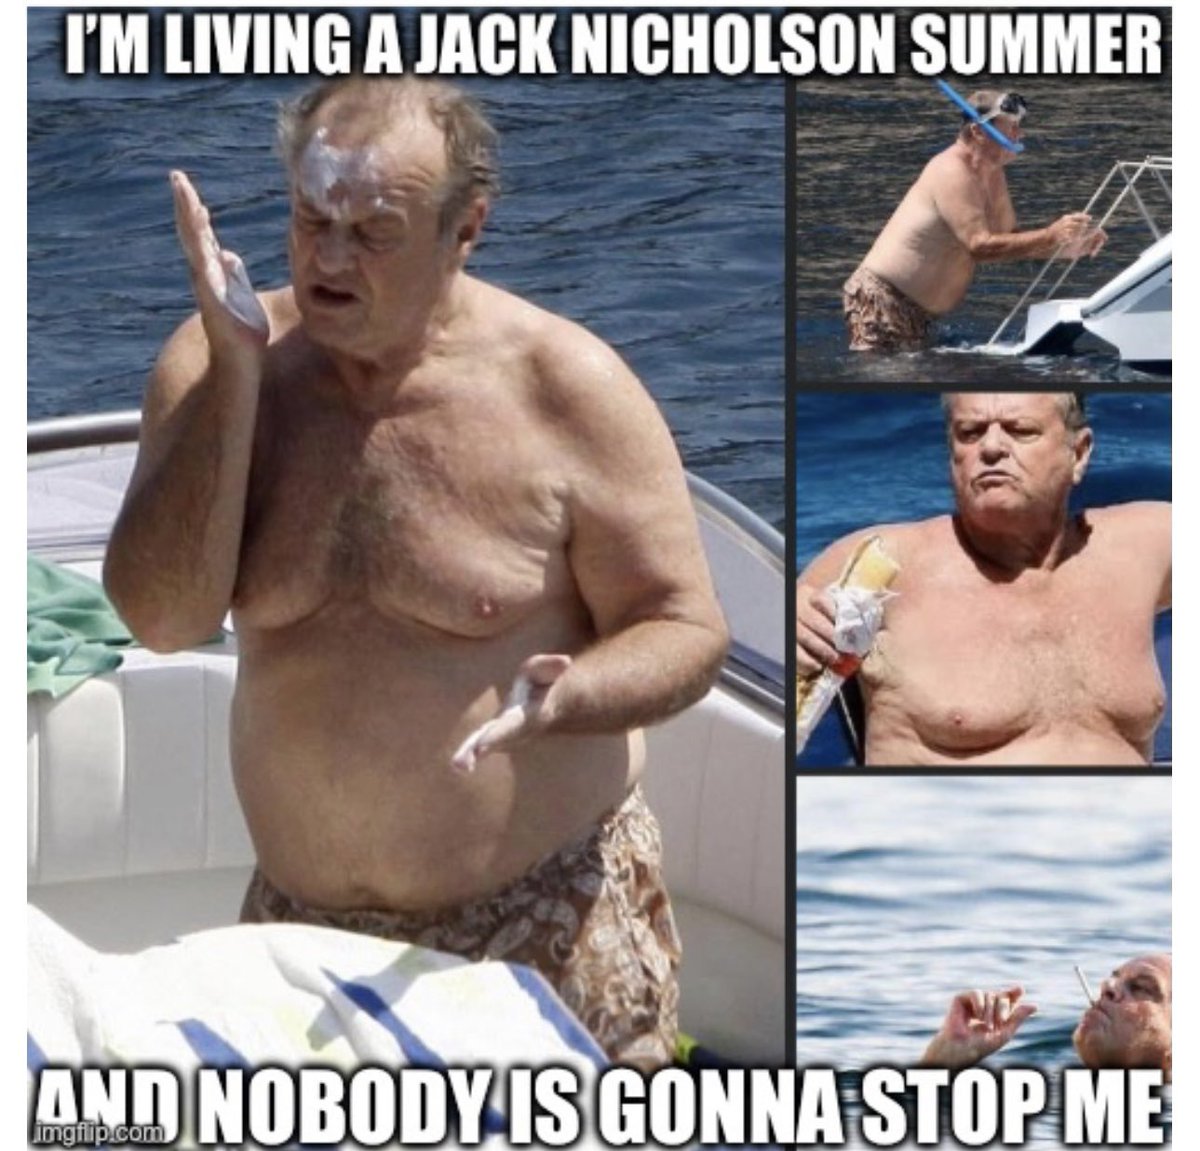 And that’s on #PERIODT 🫰🏻 
#livingmybestlife #jacknicholson #goodvibesonly #currentmood #summer #summervibes